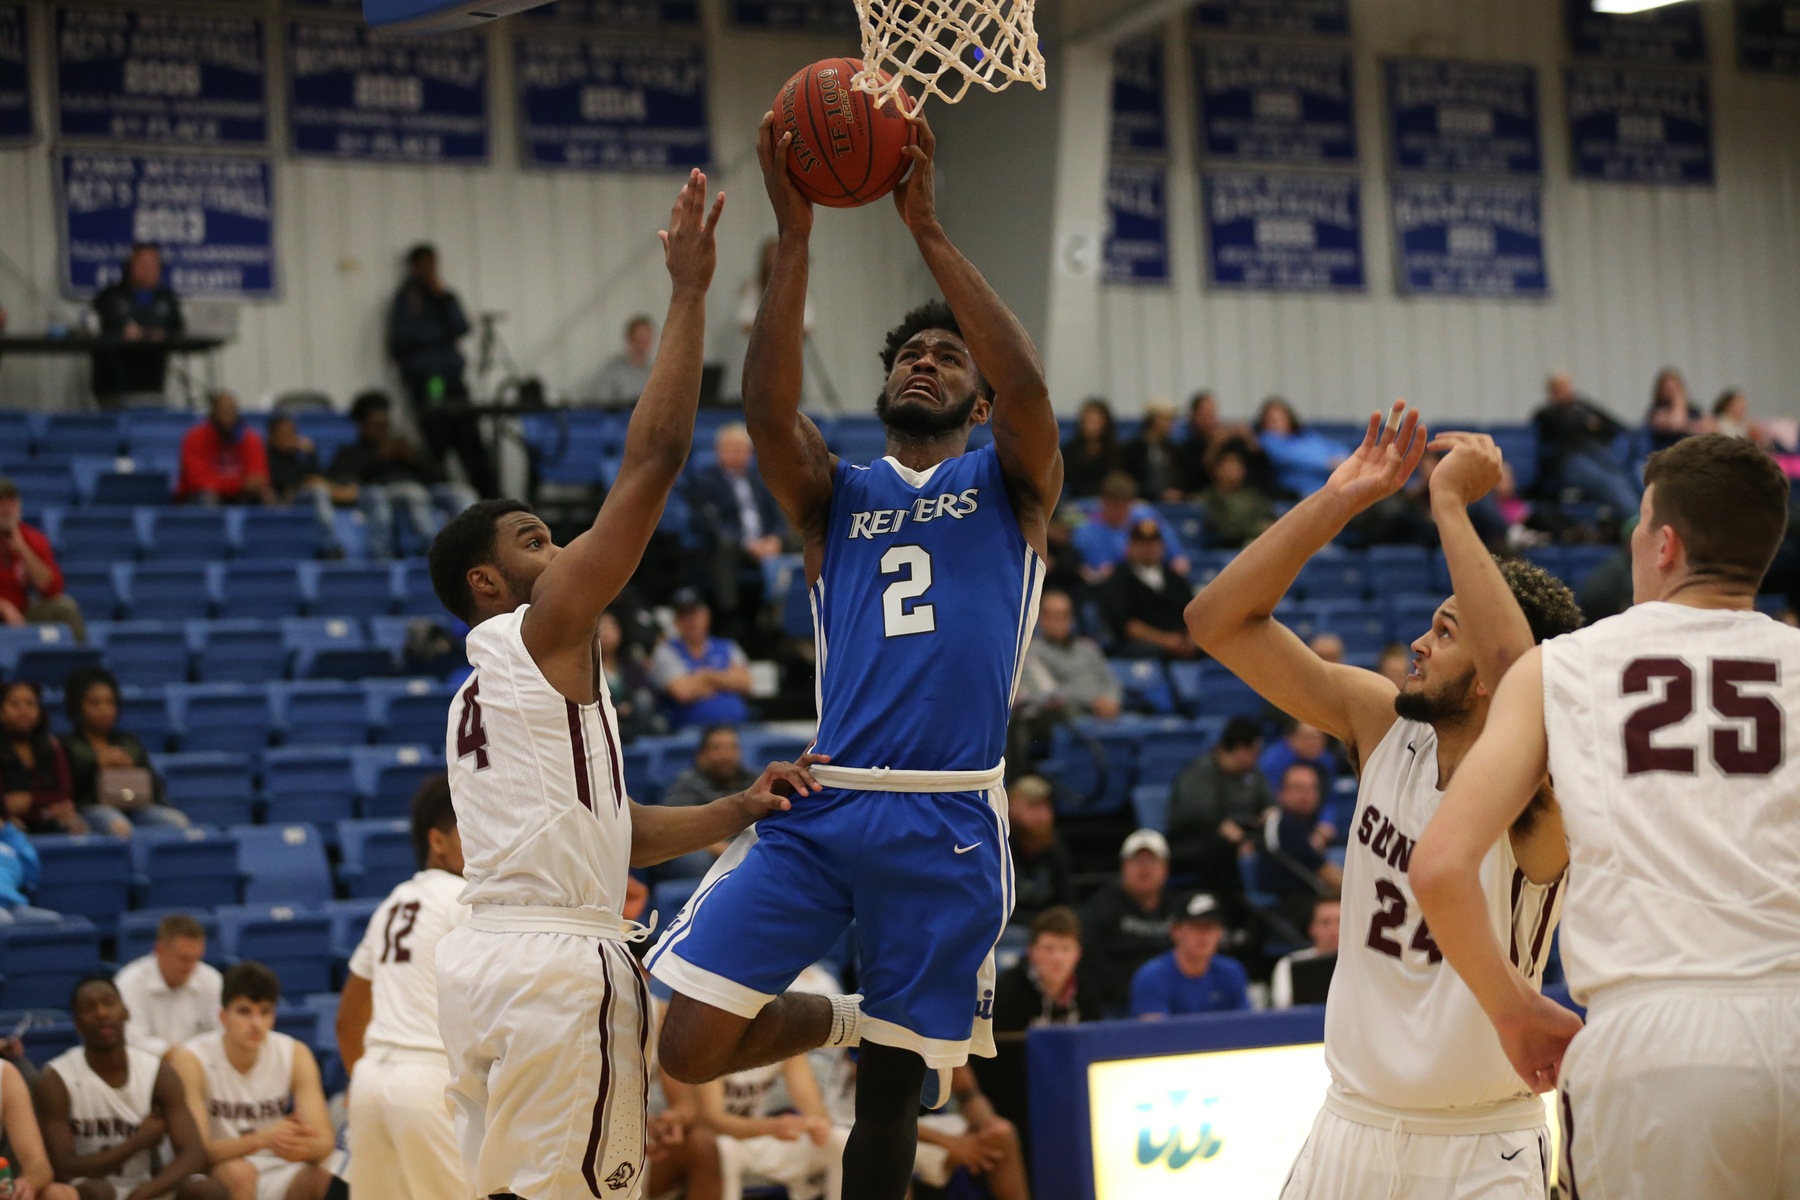 Jevon Smith scored 19 points in #21 Iowa Western's 89-63 victory over Iowa Central to open the 2018 portion of the Reivers 2017-18 men's basketball schedule.